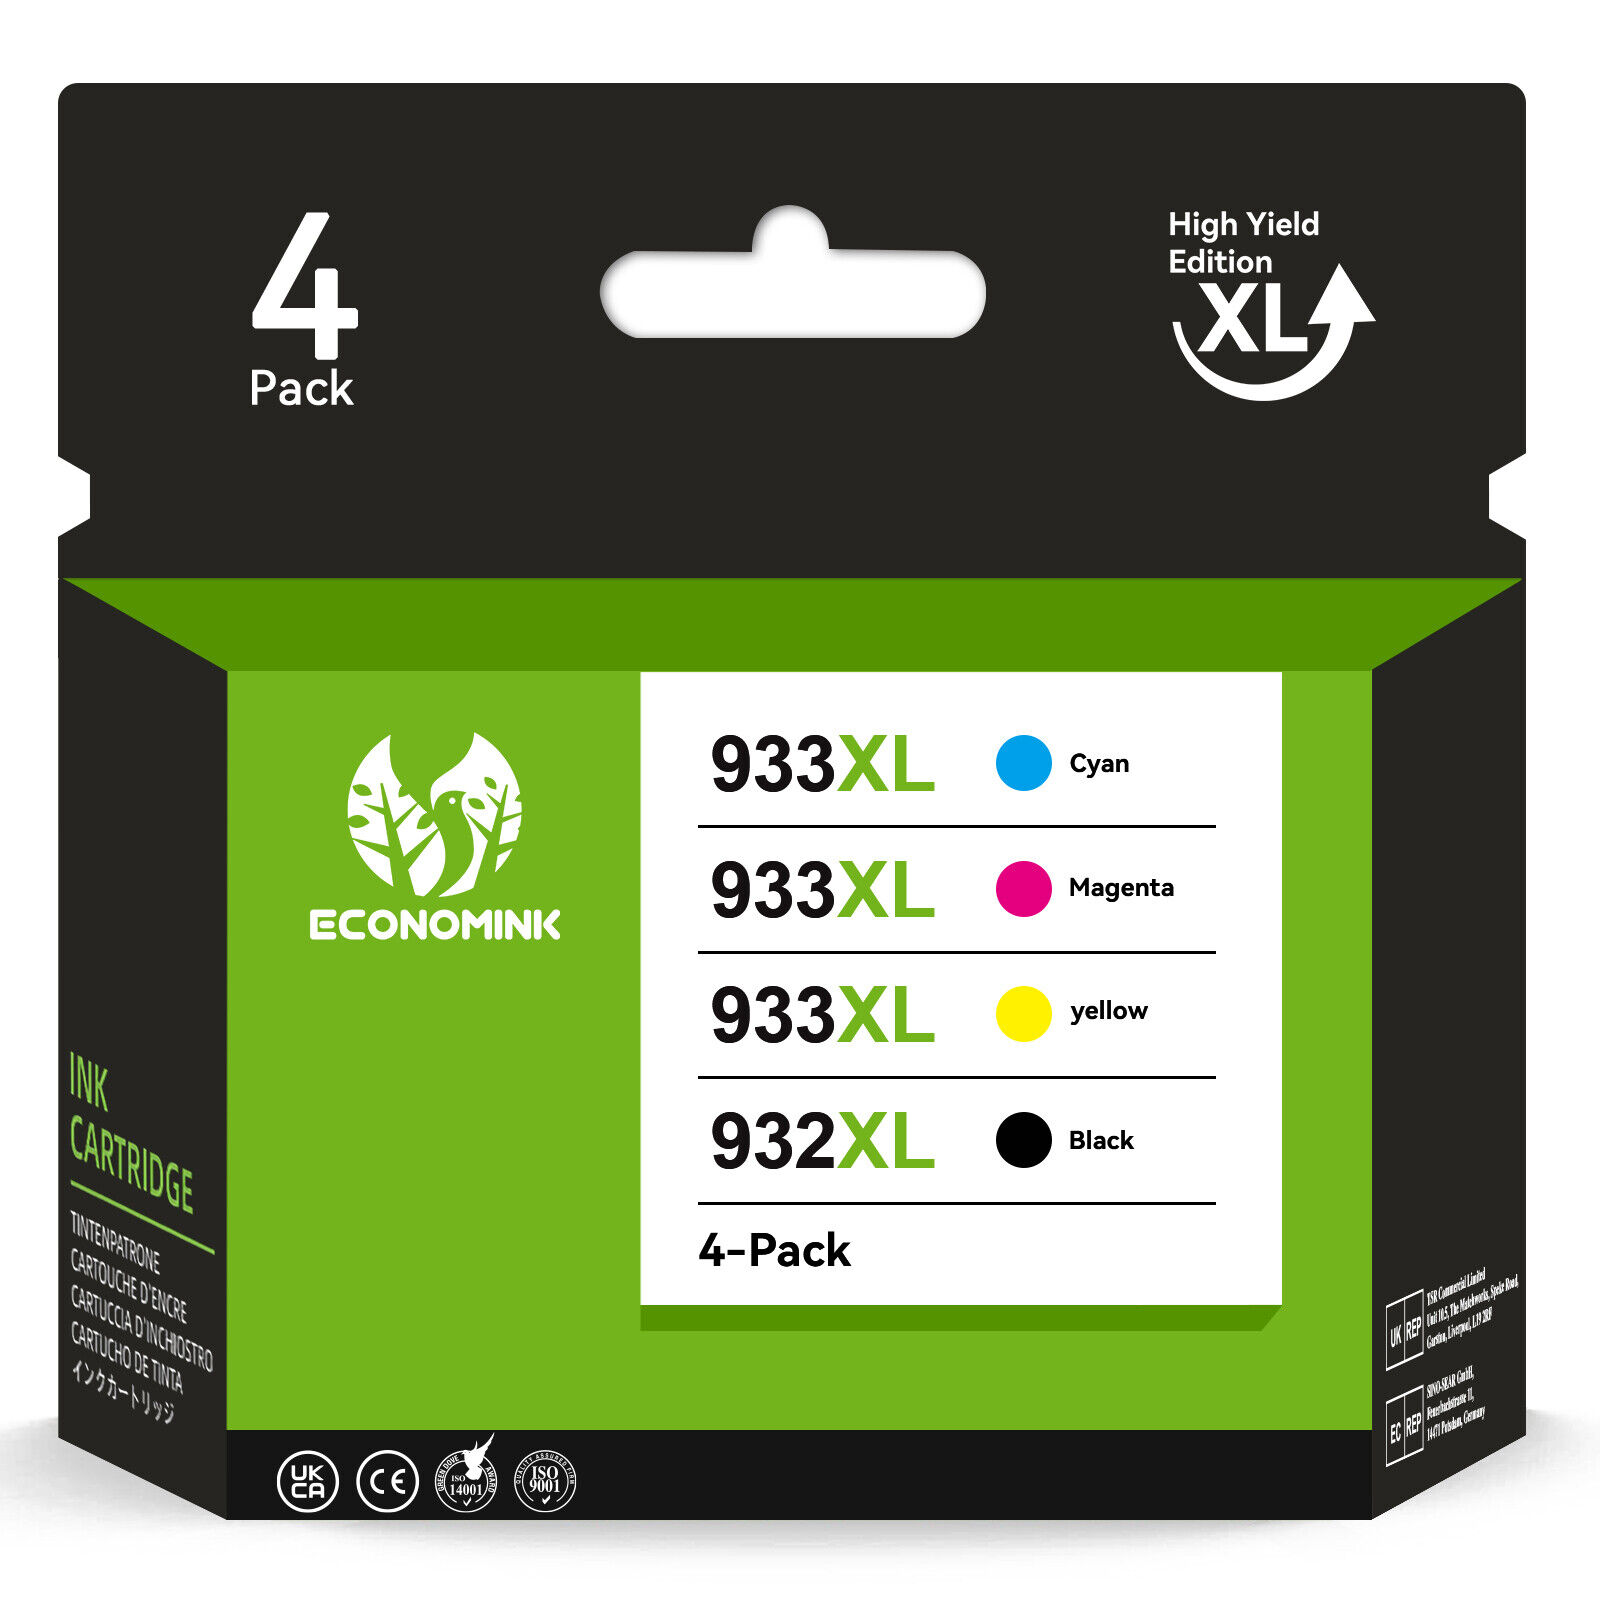 4PK 932XL 933XL Ink Cartridges Replacement for HP Officejet 6100 6600 6700 7100 